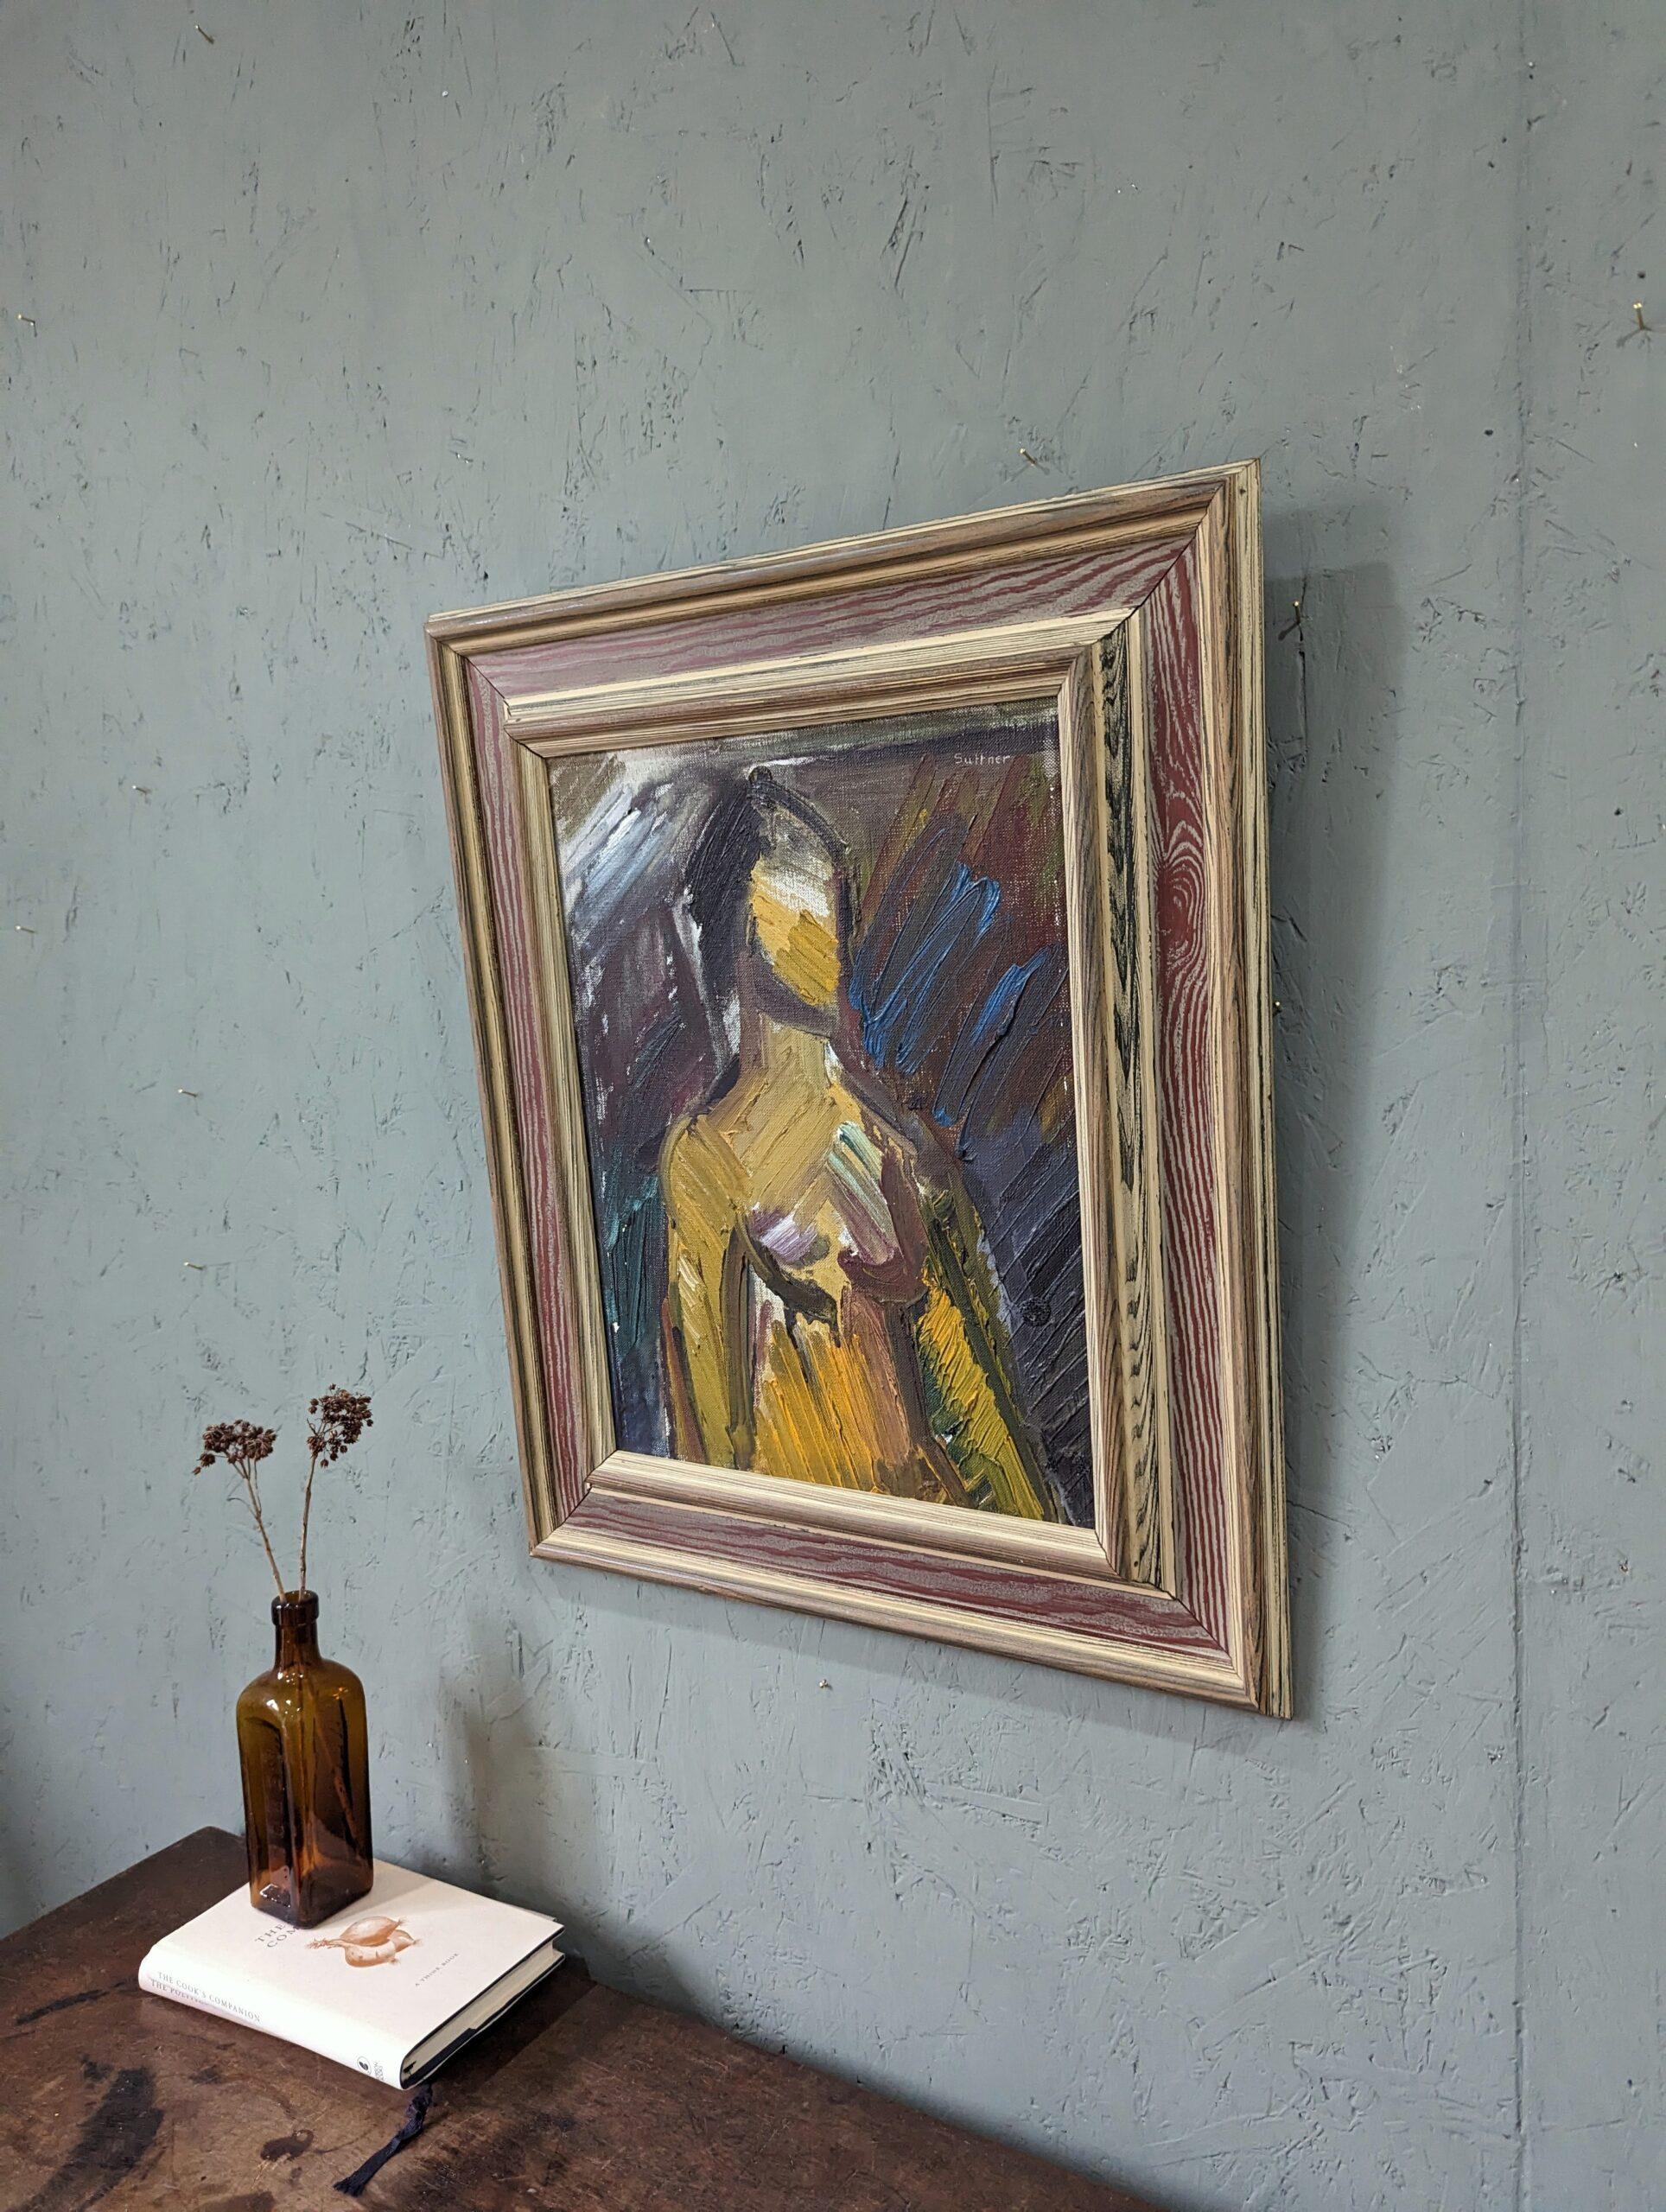 PAINTERLY PORTRAIT
Size: 53 x 44 cm (including frame)
Oil on canvas

A very striking and emotive mid-century figurative portrait, executed in oil onto canvas.

The painting portrays a silhouette of a solitary figure, bathed in a luminous yellow hue.